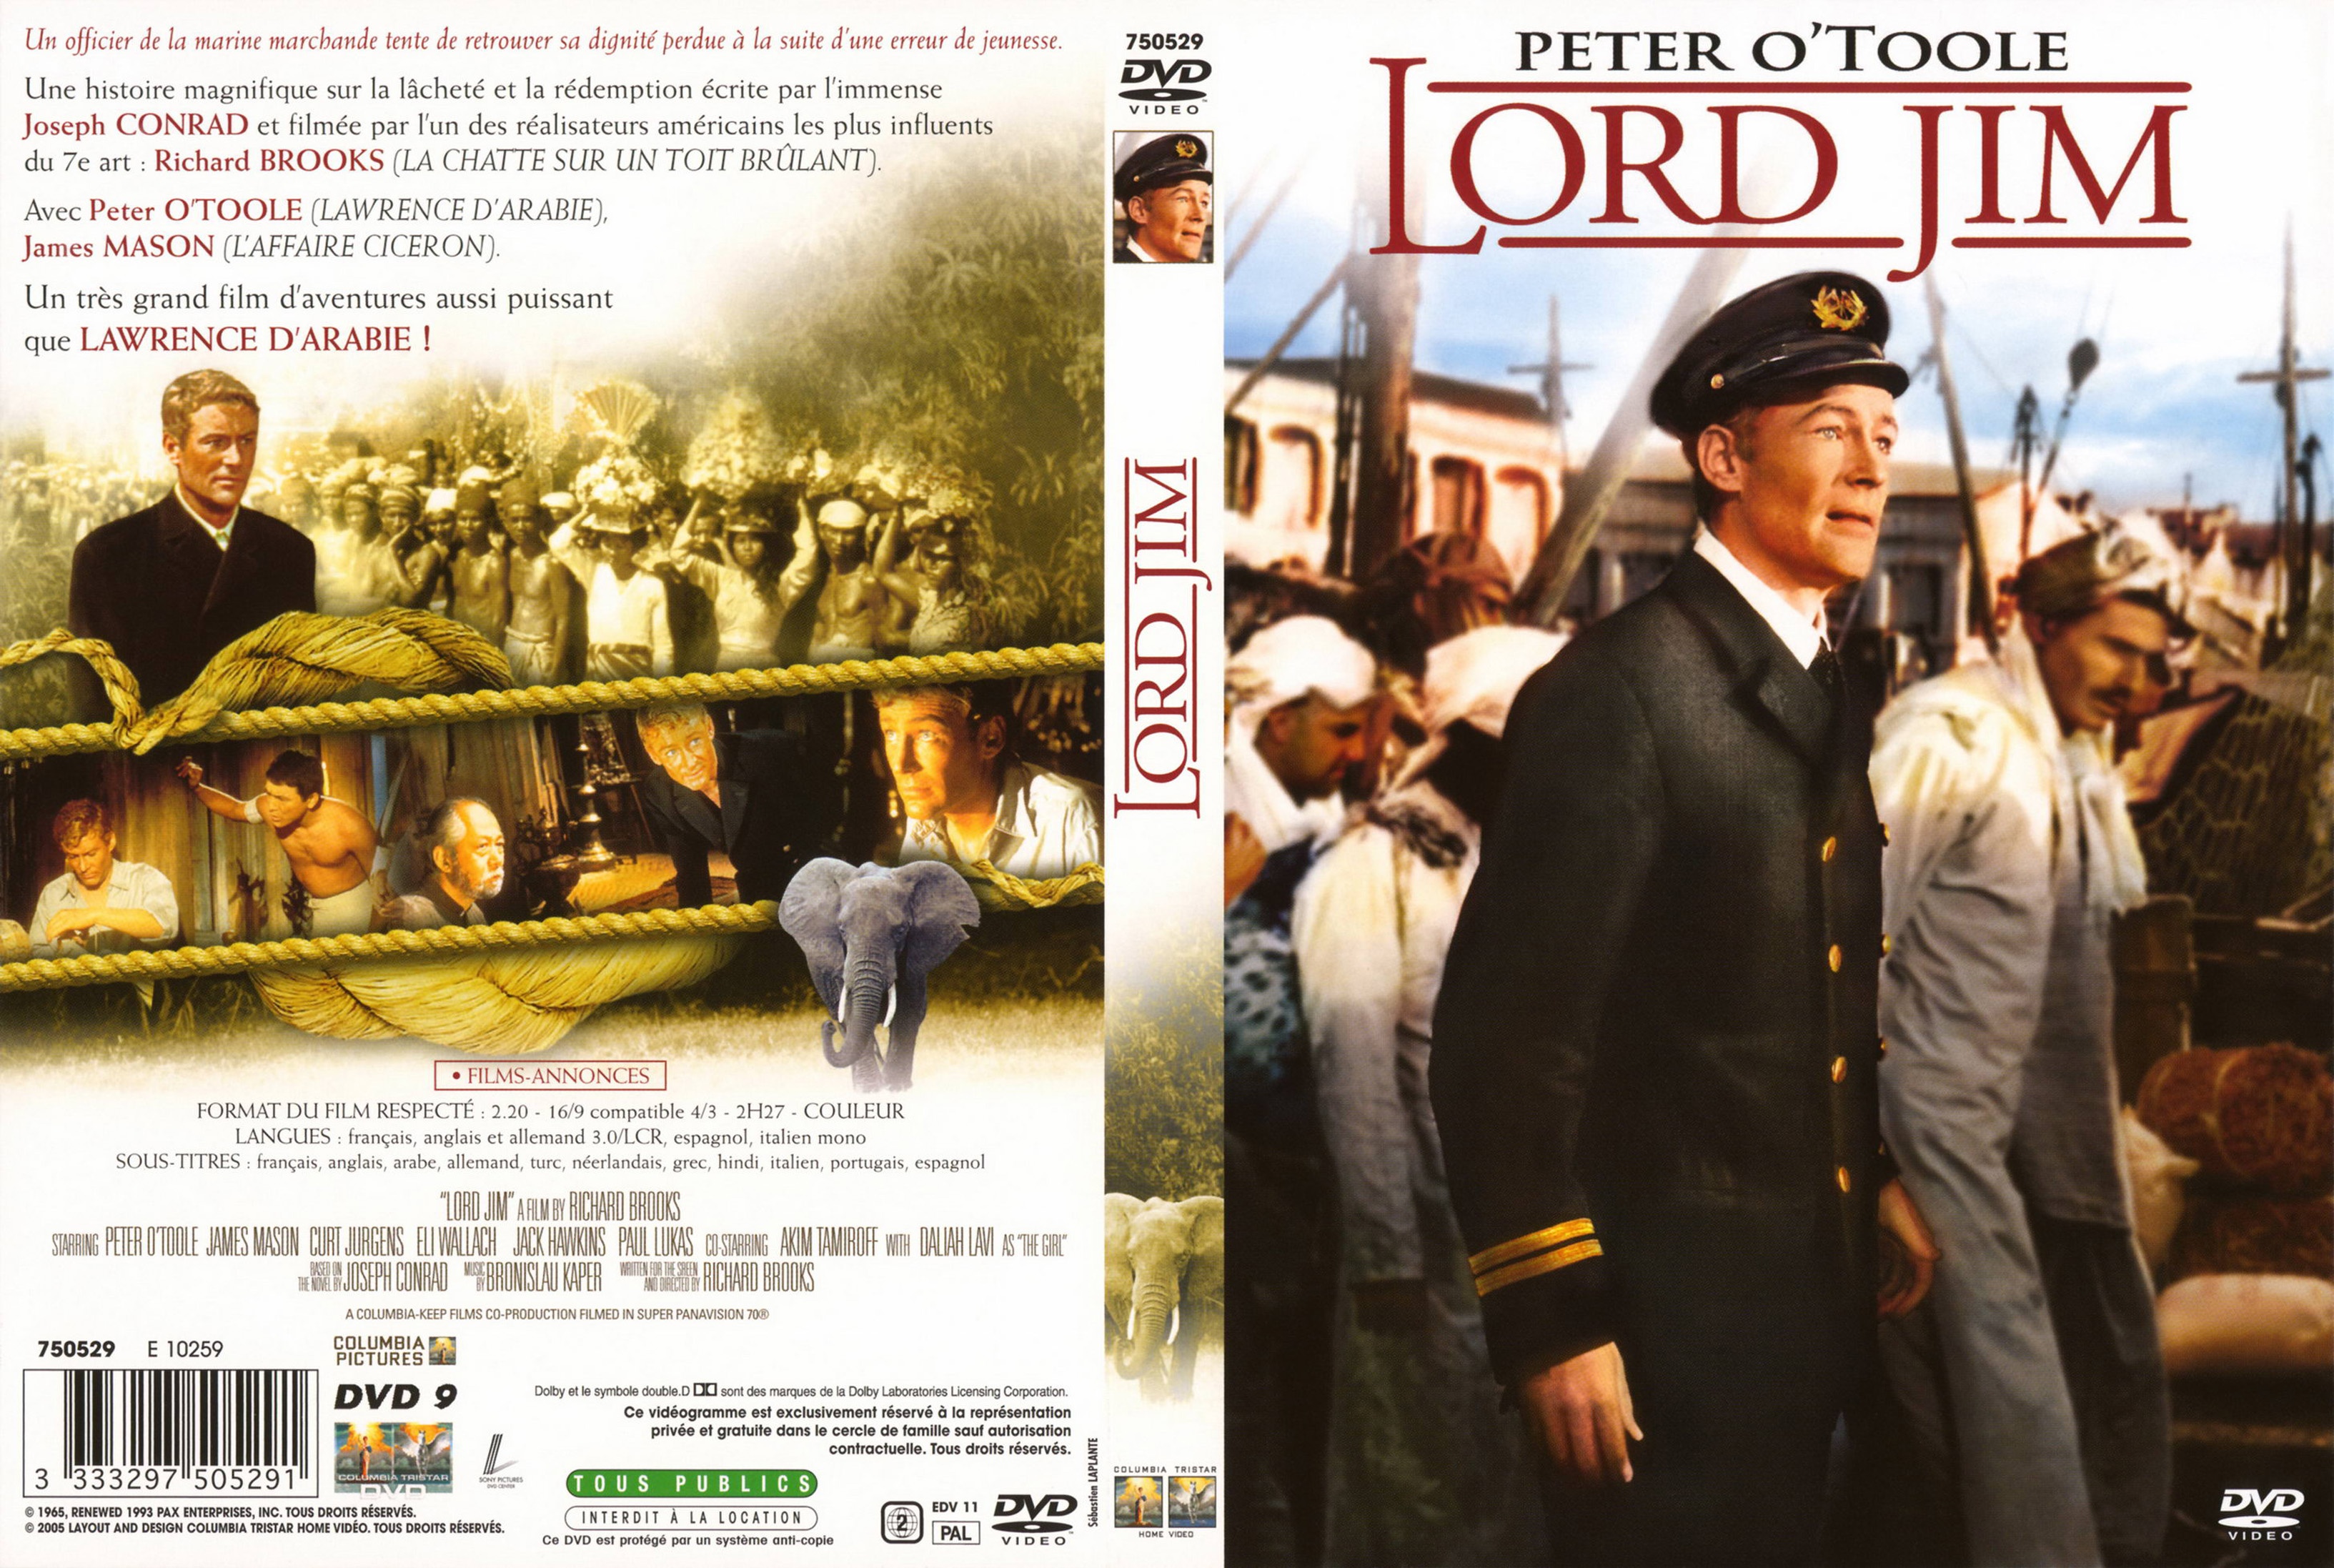 Jaquette DVD Lord Jim